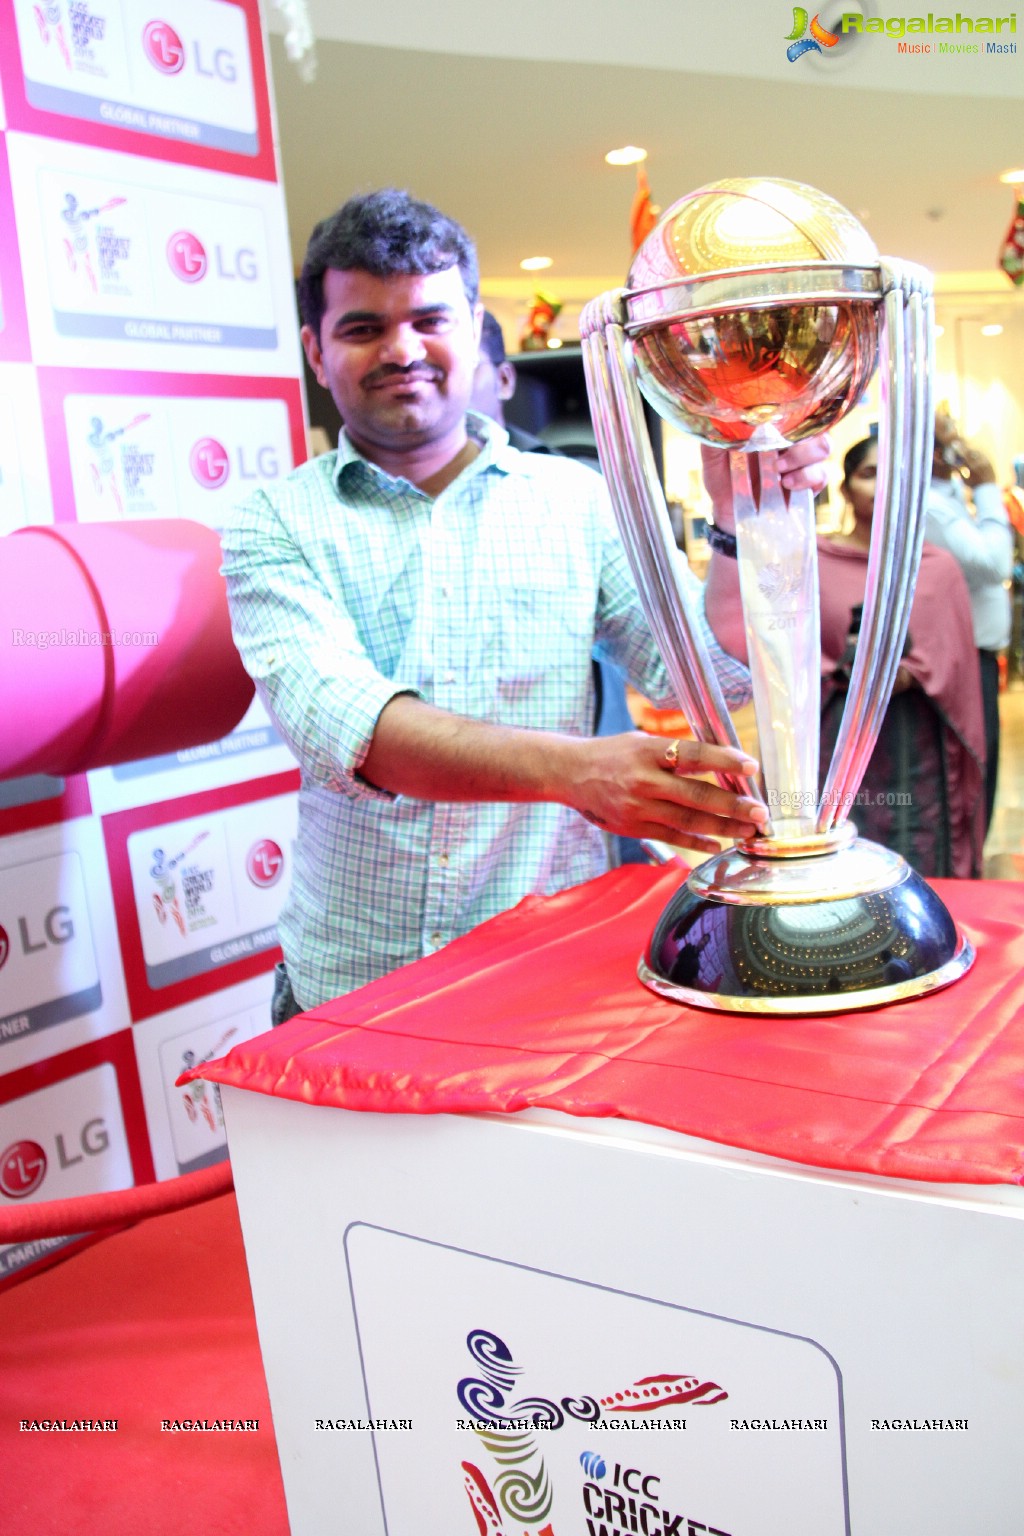 LG ICC Cricket World Cup 2015 Event